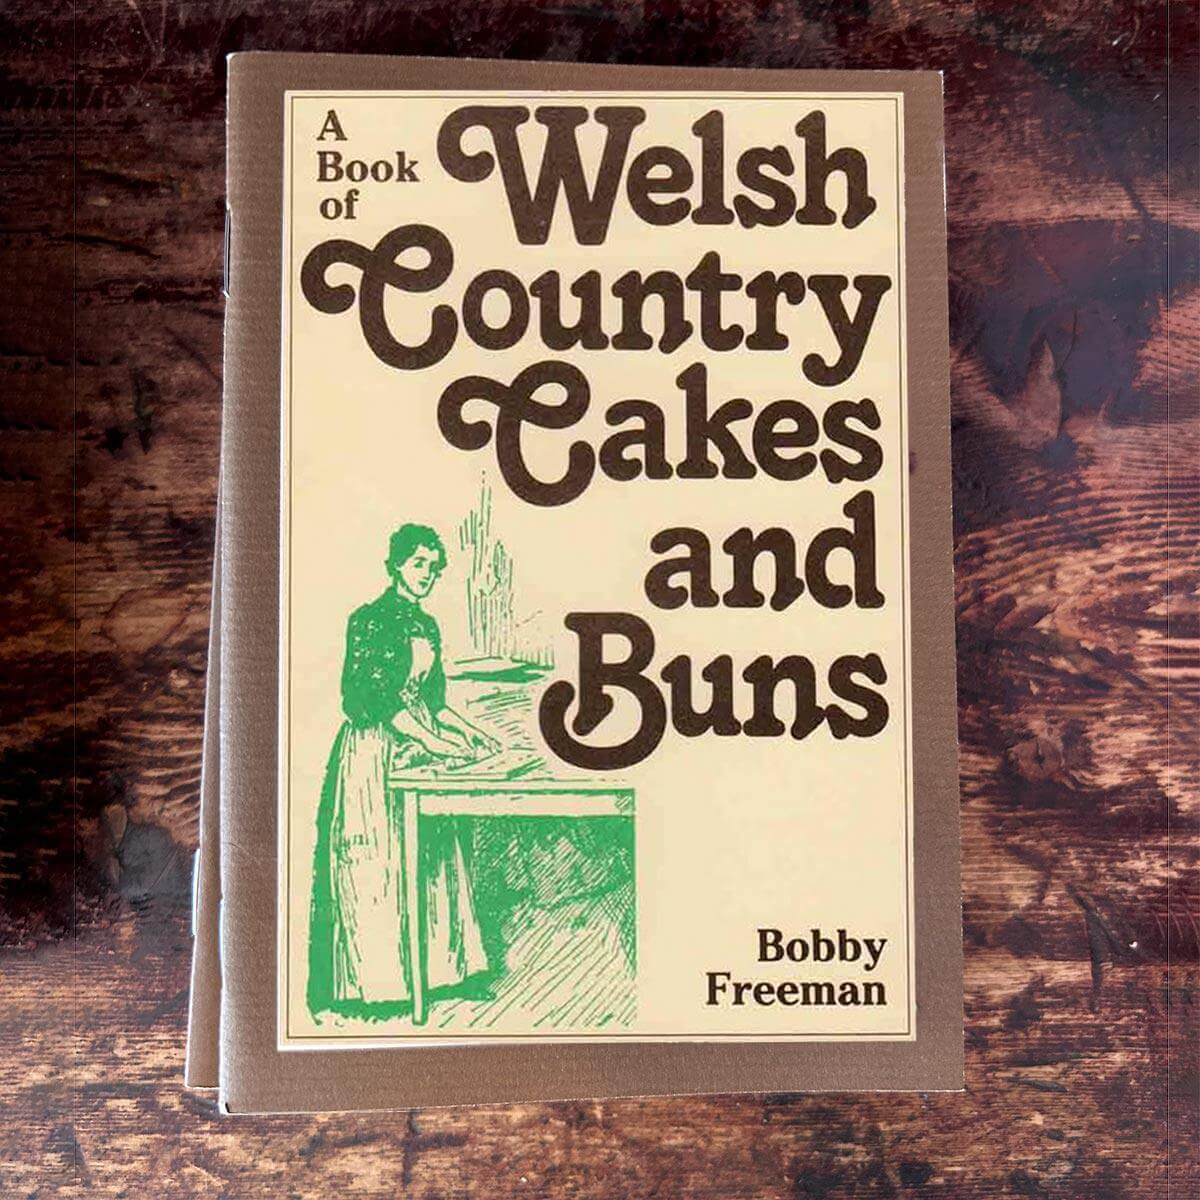 A Book of Welsh Country Cakes and Buns - Recipe Booklet - Bobby Freeman